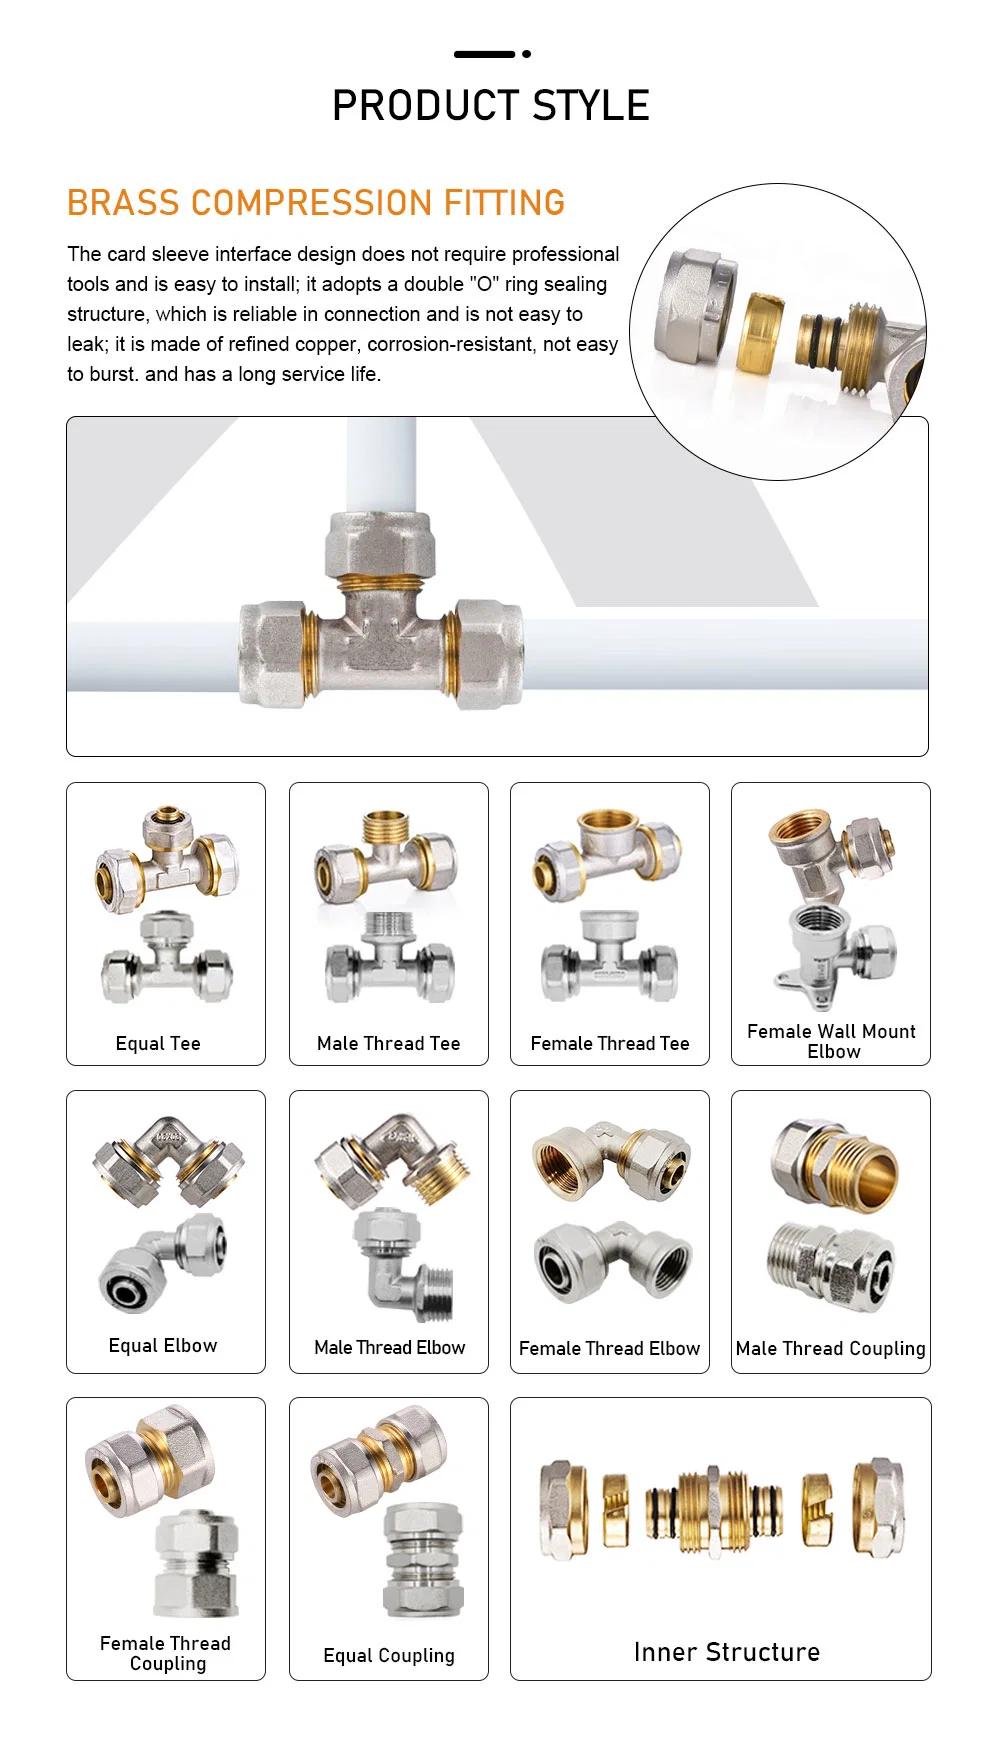 Welding Positive Tee Hot-DIP Galvanized Hose Fittings Pex Fittings Plumbing 16-32mm Compression Pex Brass Fittings